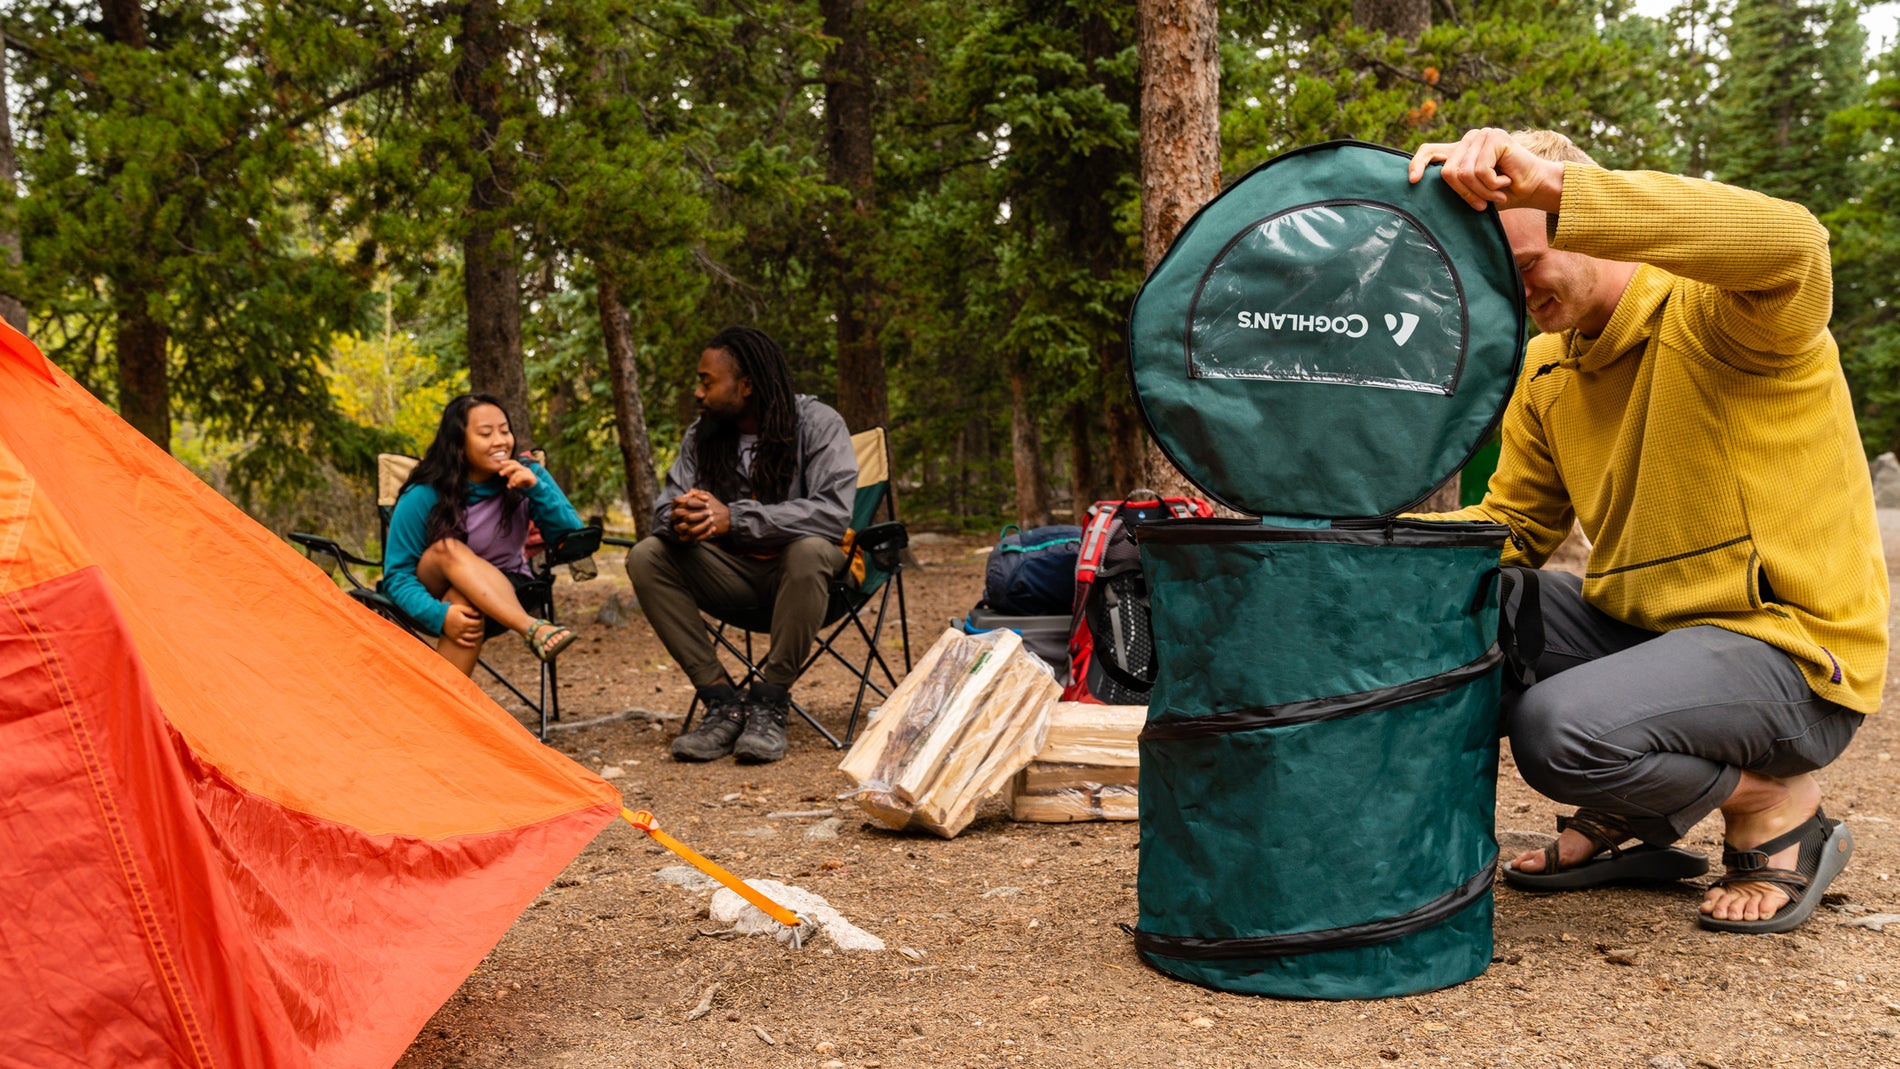 campsite with man opening pop-up trash can